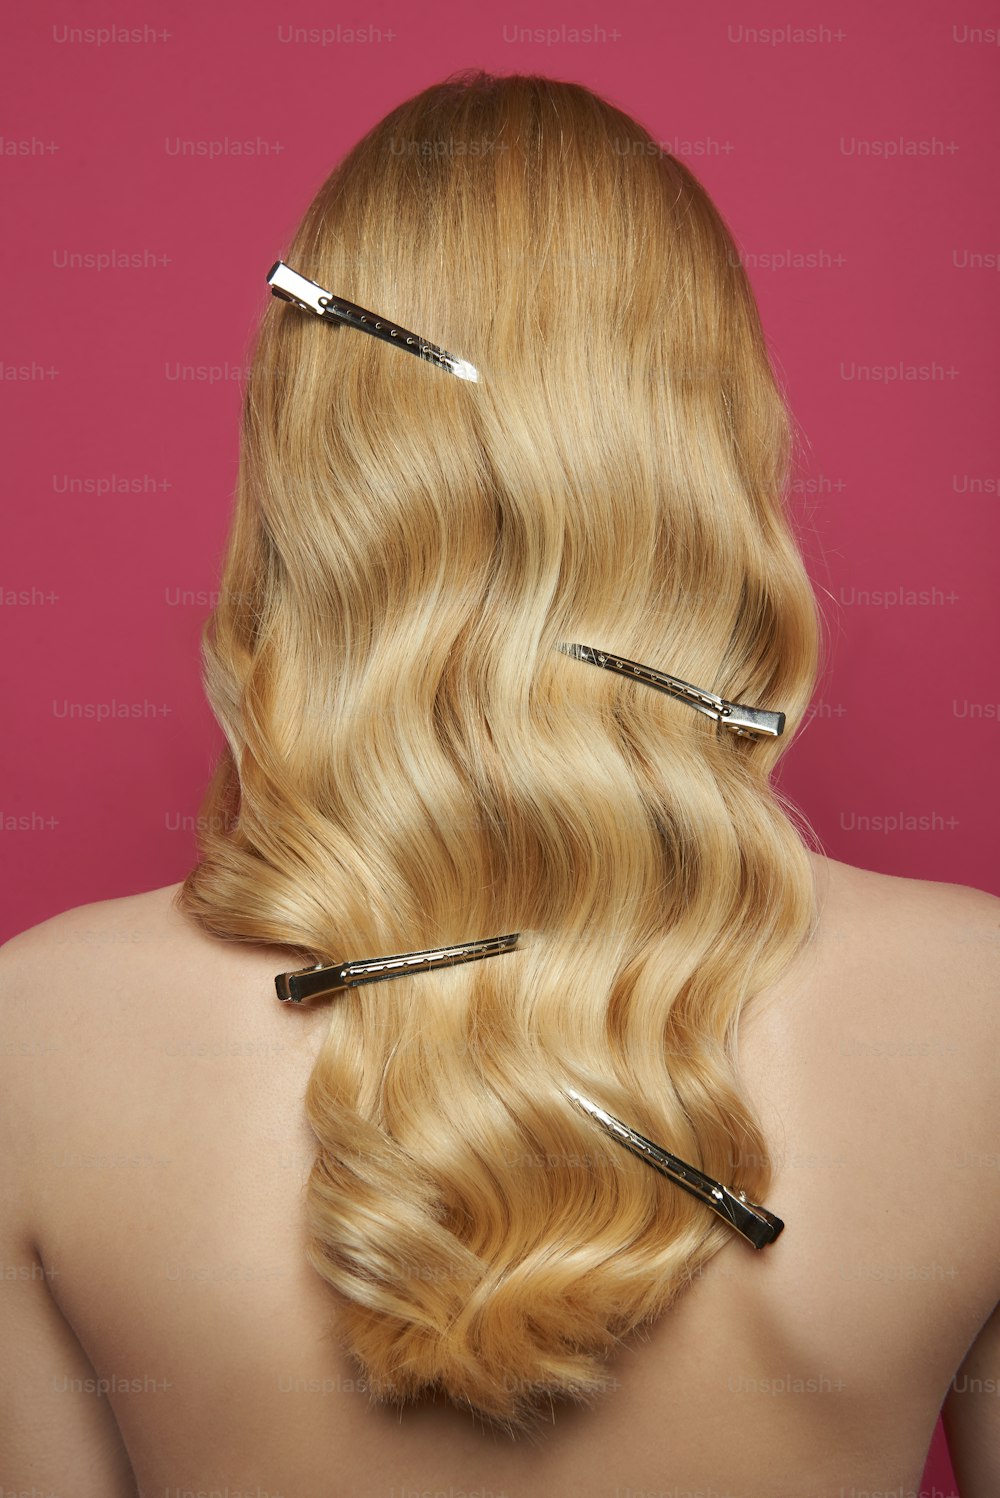 Beauty and hairstyle. Close up back side portrait of young graceful naked blonde woman with barrette alligator clips in wavy locks. Isolated on pink